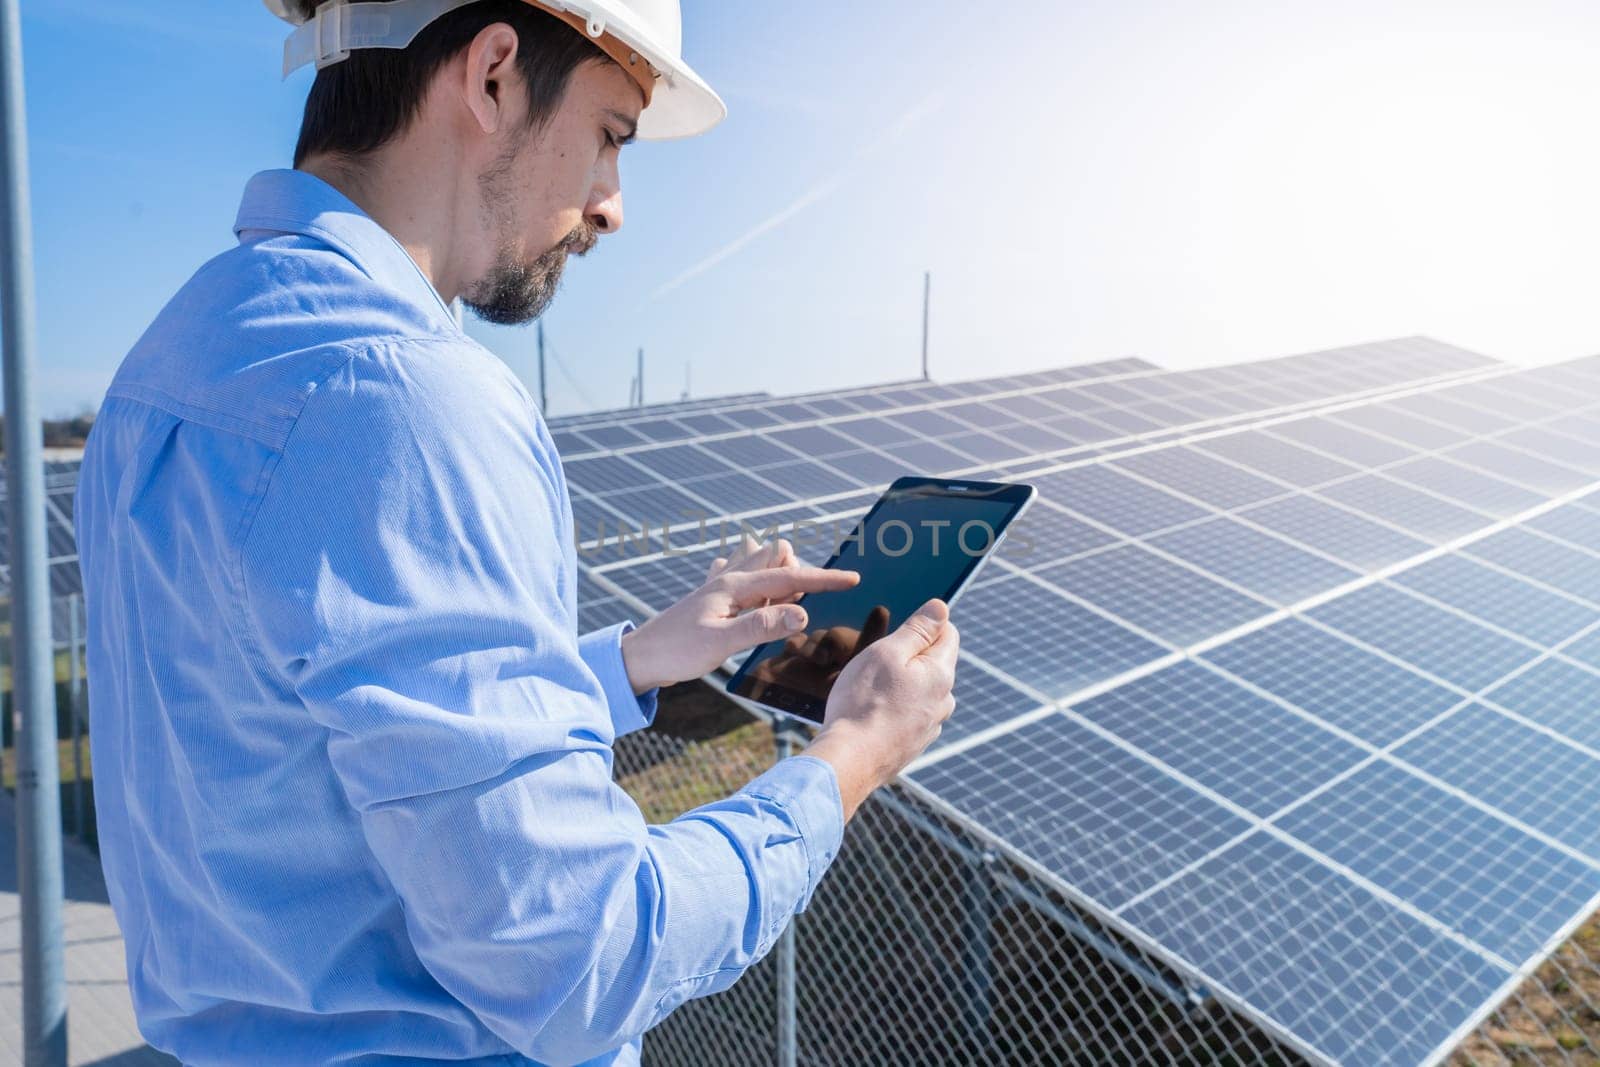 Engineer working with a tablet with photovoltaic solar panel system plant in the background. Green clean energy concept.